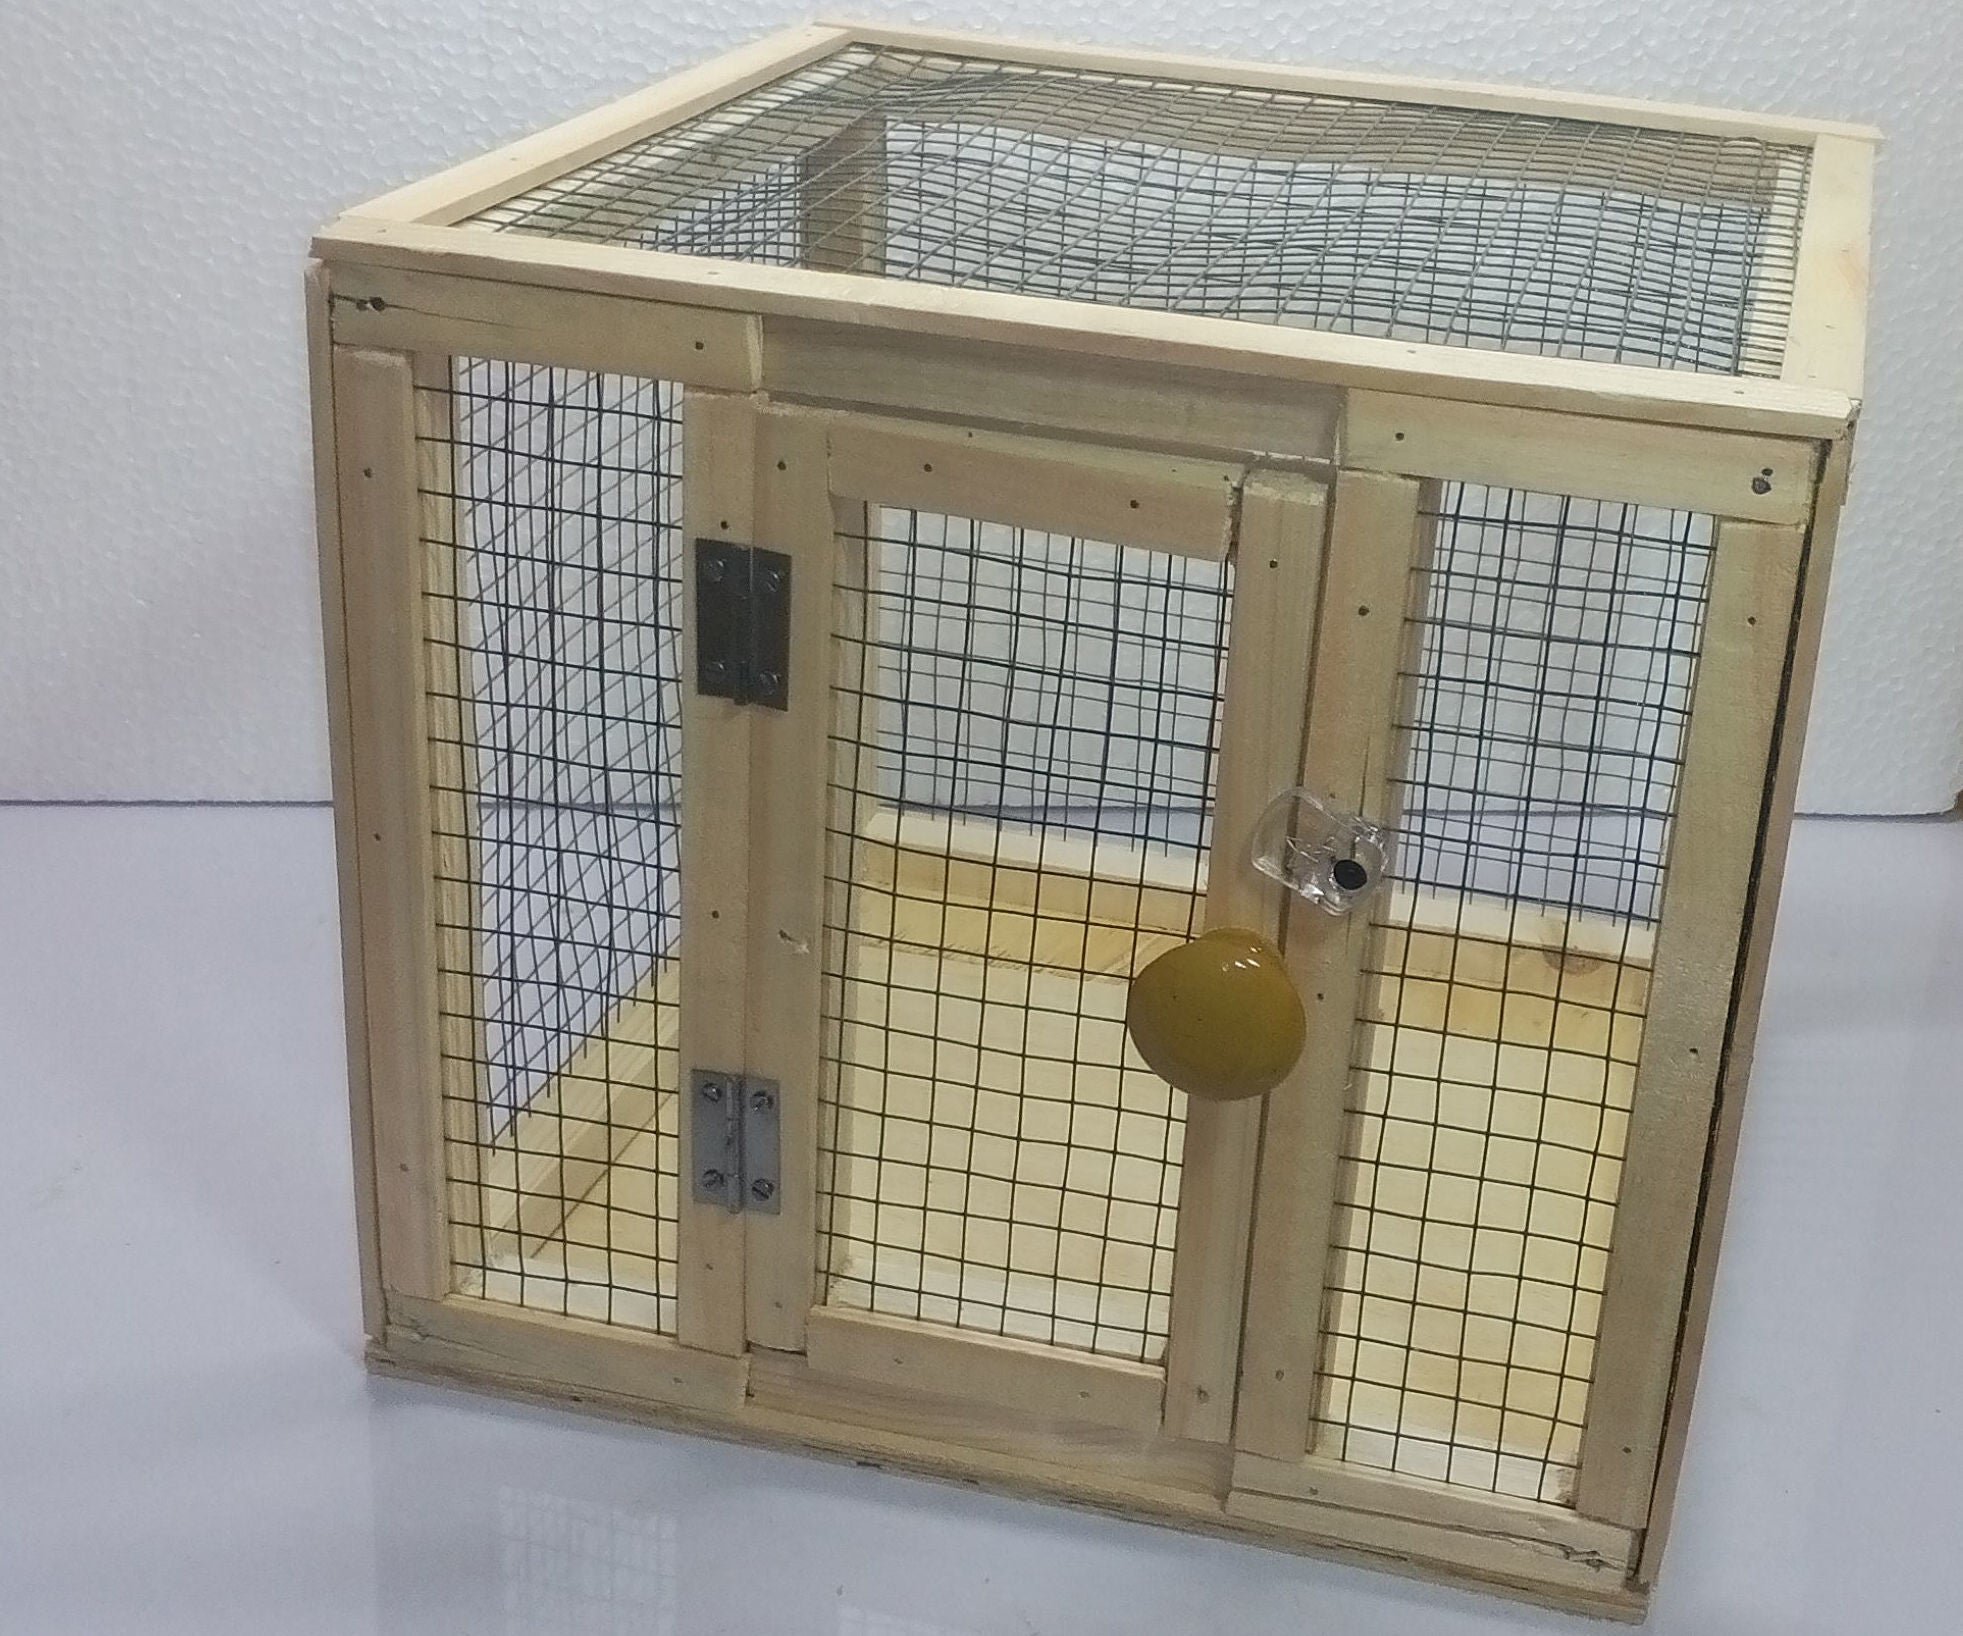 How to Make a Diy Cage